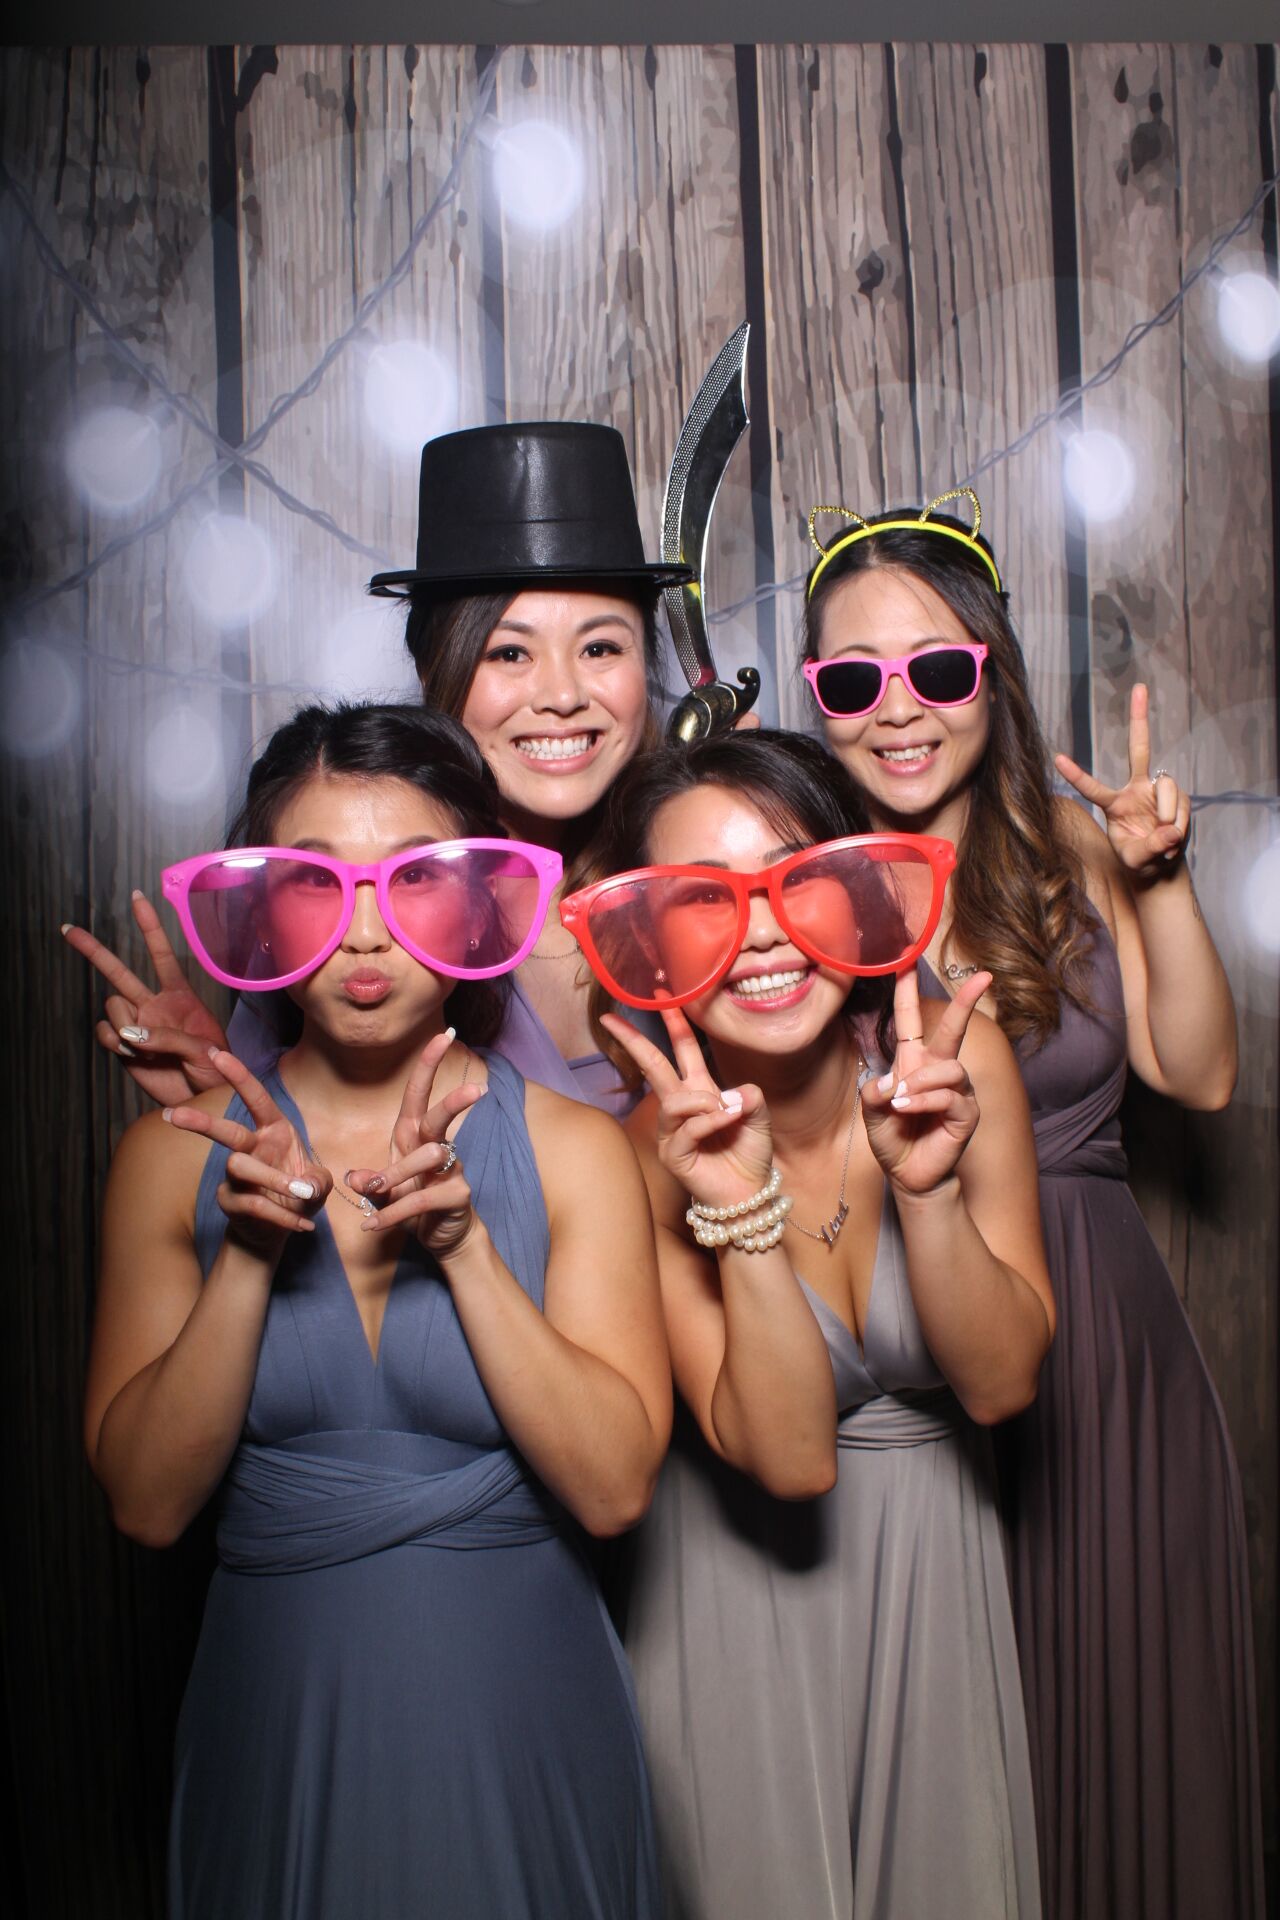 corporate events, local business, oregon events, photo booth rentals, holiday party